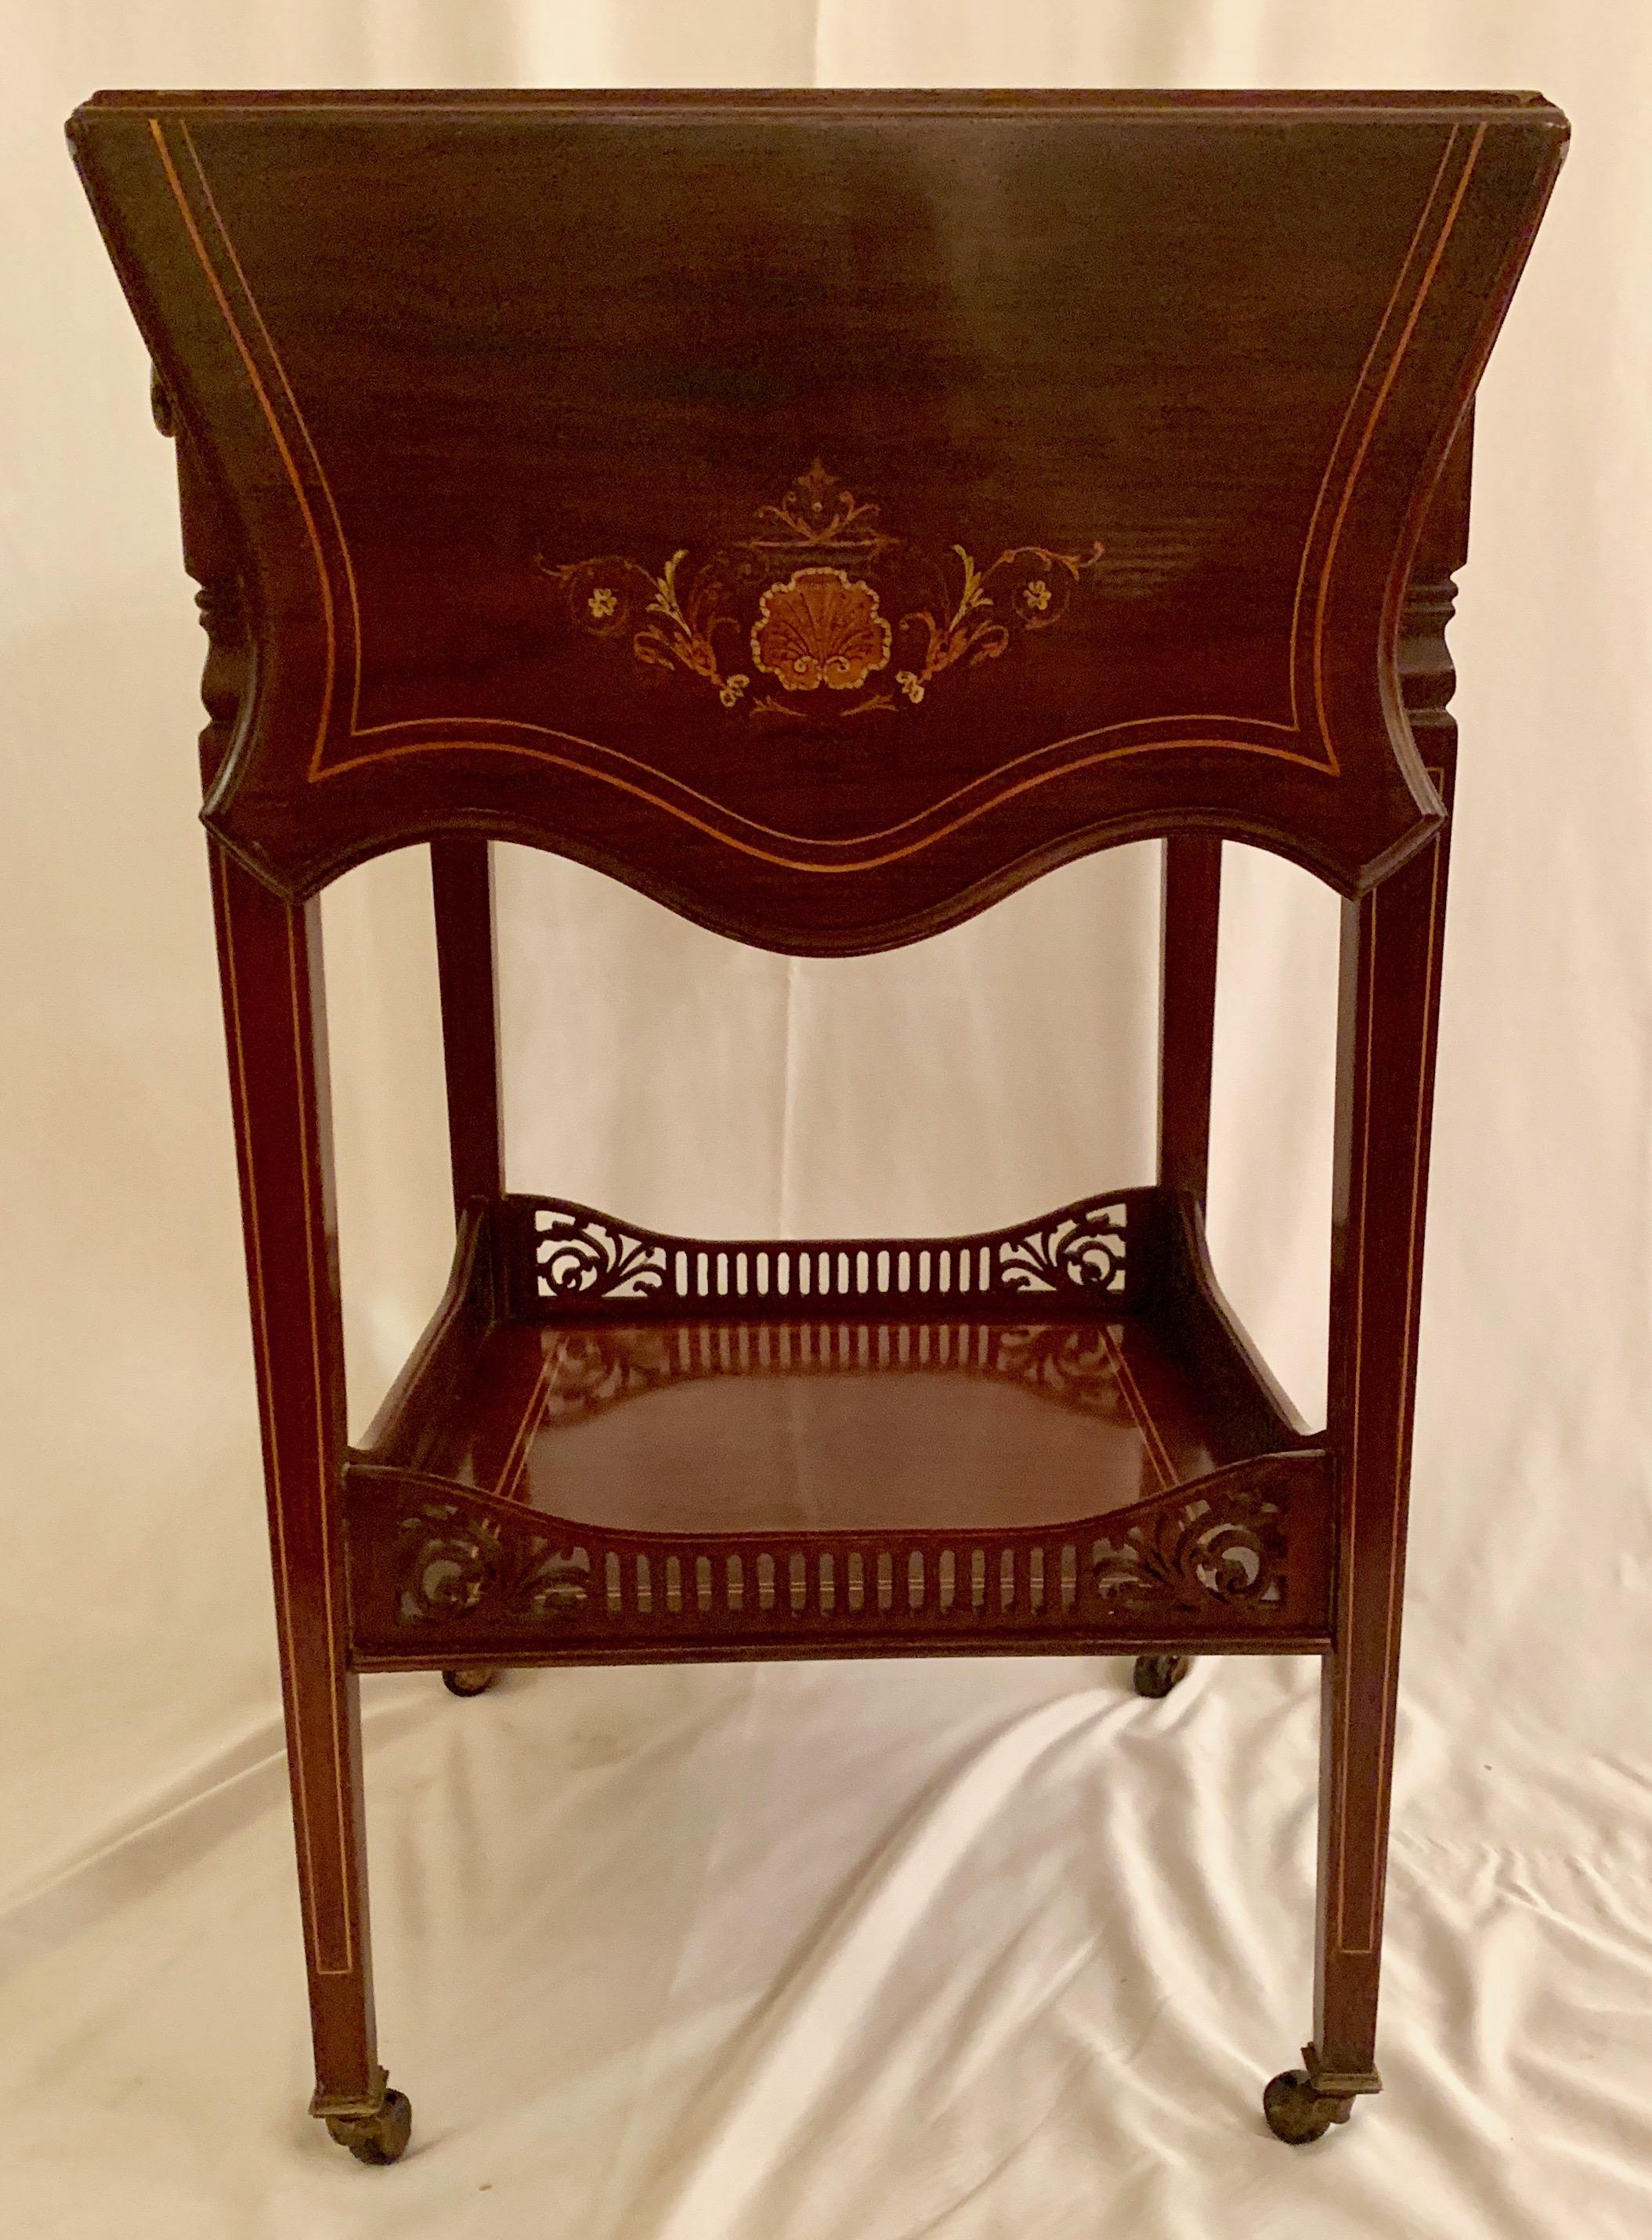 Inlay Antique Rosewood Inlaid Drop-Leaf Lamp Table, circa 1870-1880